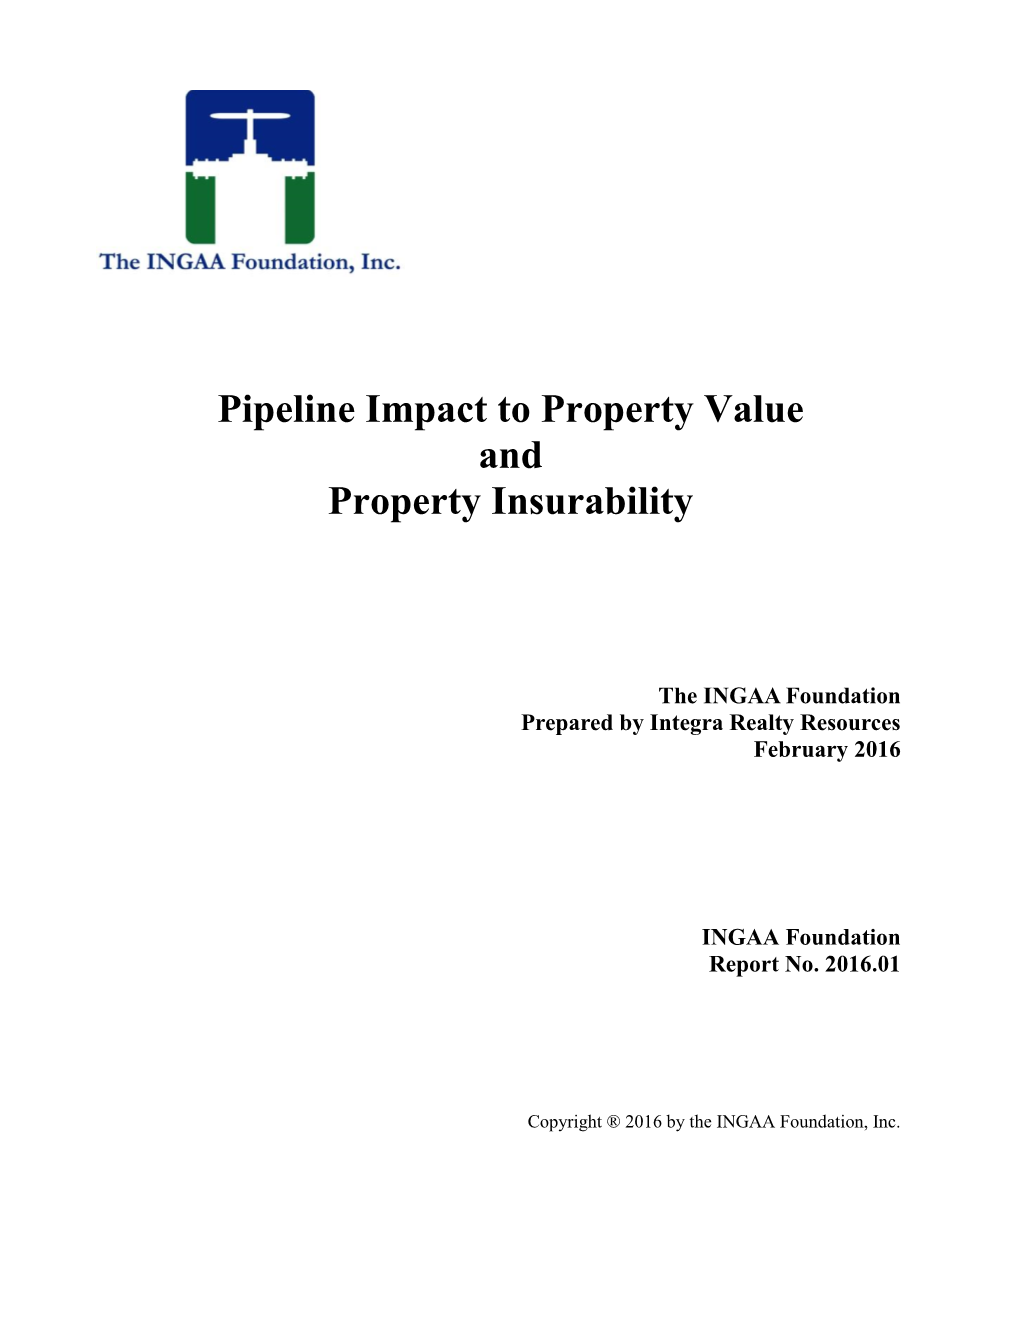 Pipeline Impact to Property Value and Property Insurability